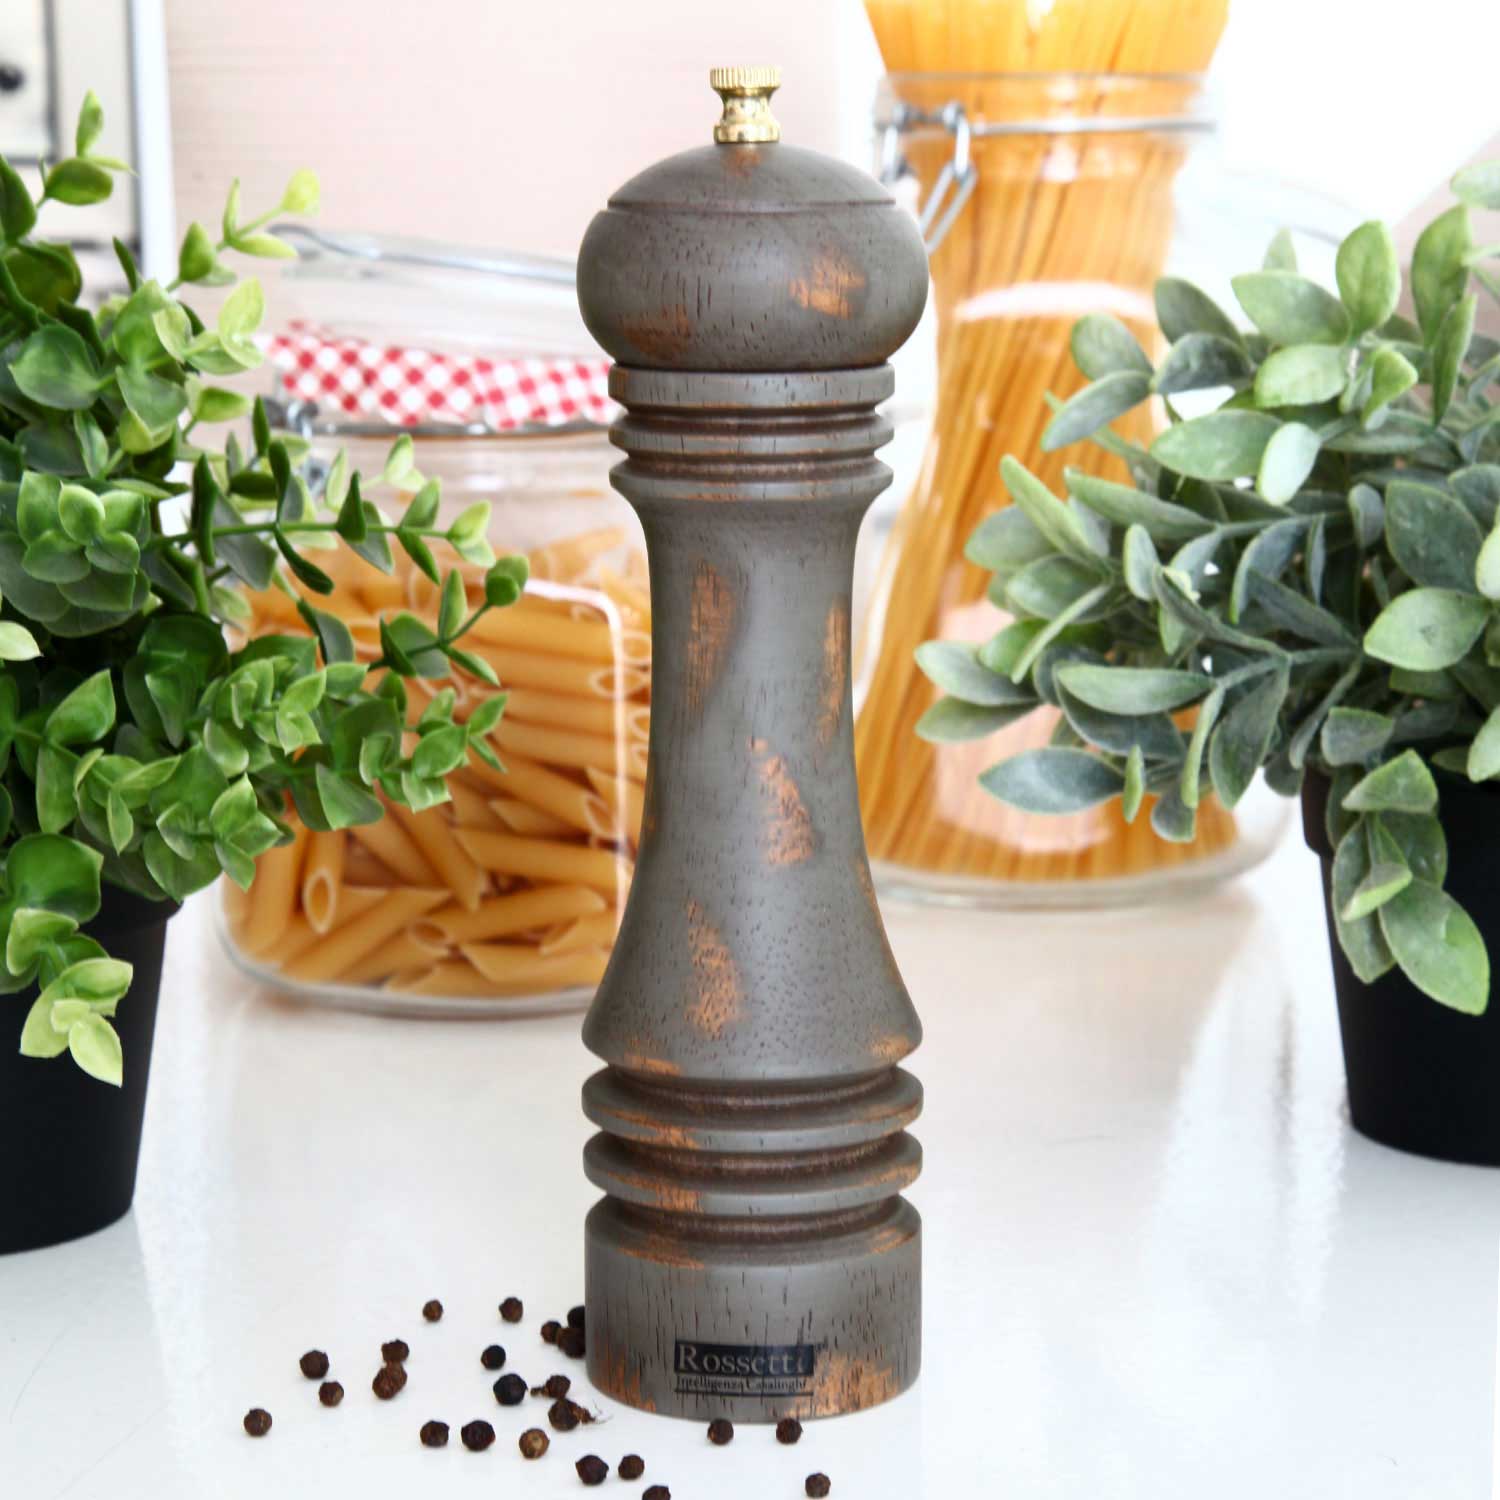 Rossetti Roma 1956 Wood Pepper Grinder Small